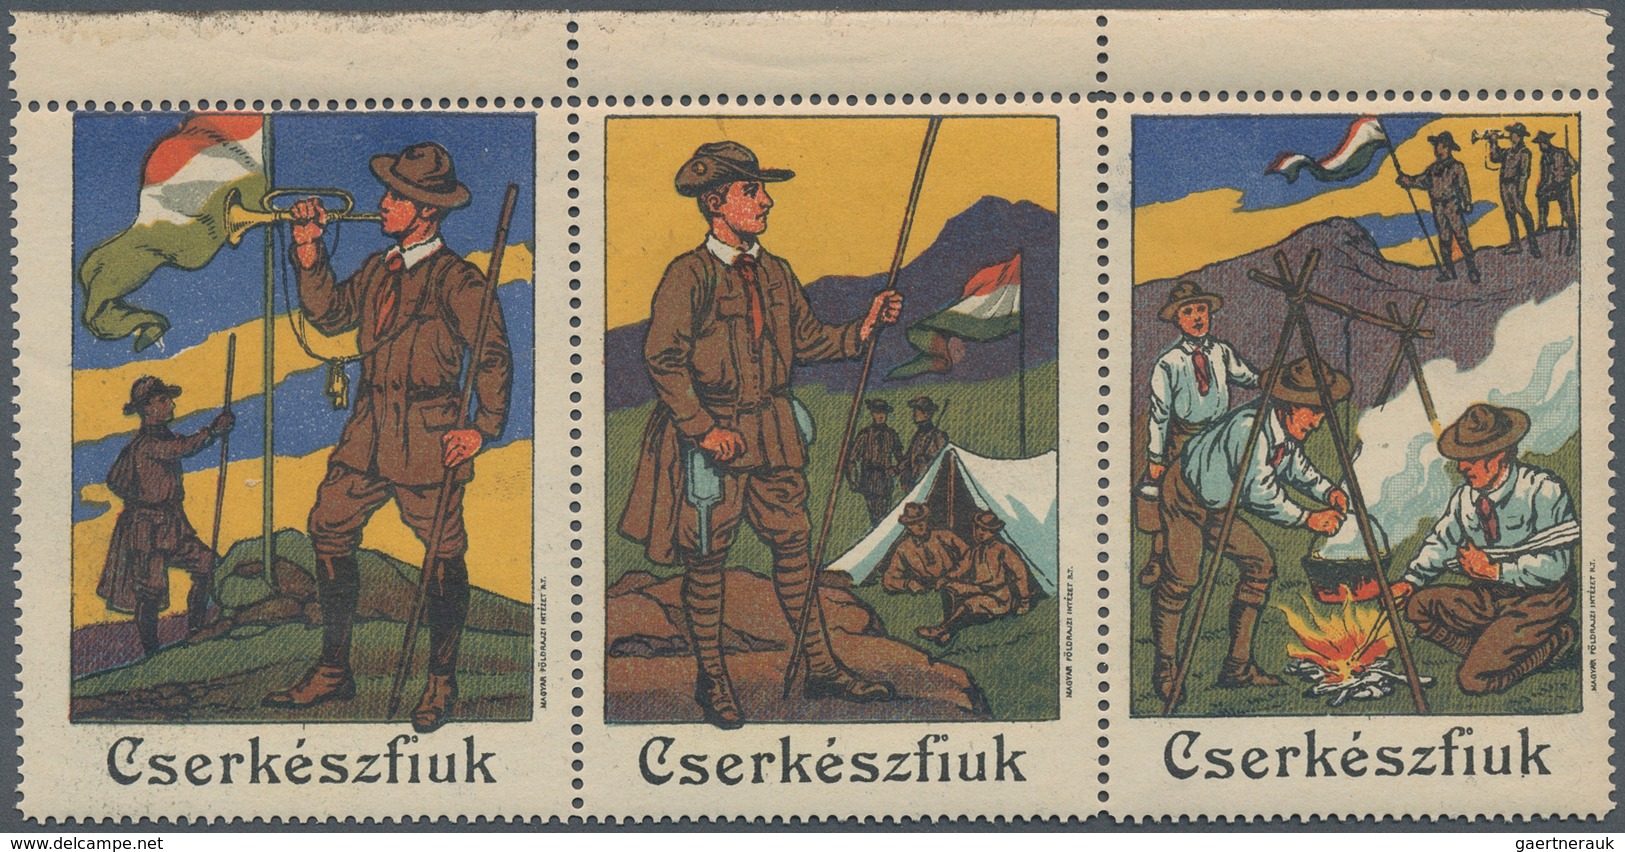 25400 Thematik: Pfadfinder / boy scouts: 1920/2010, Hungary. Collection of about 390 covers, cards and doc